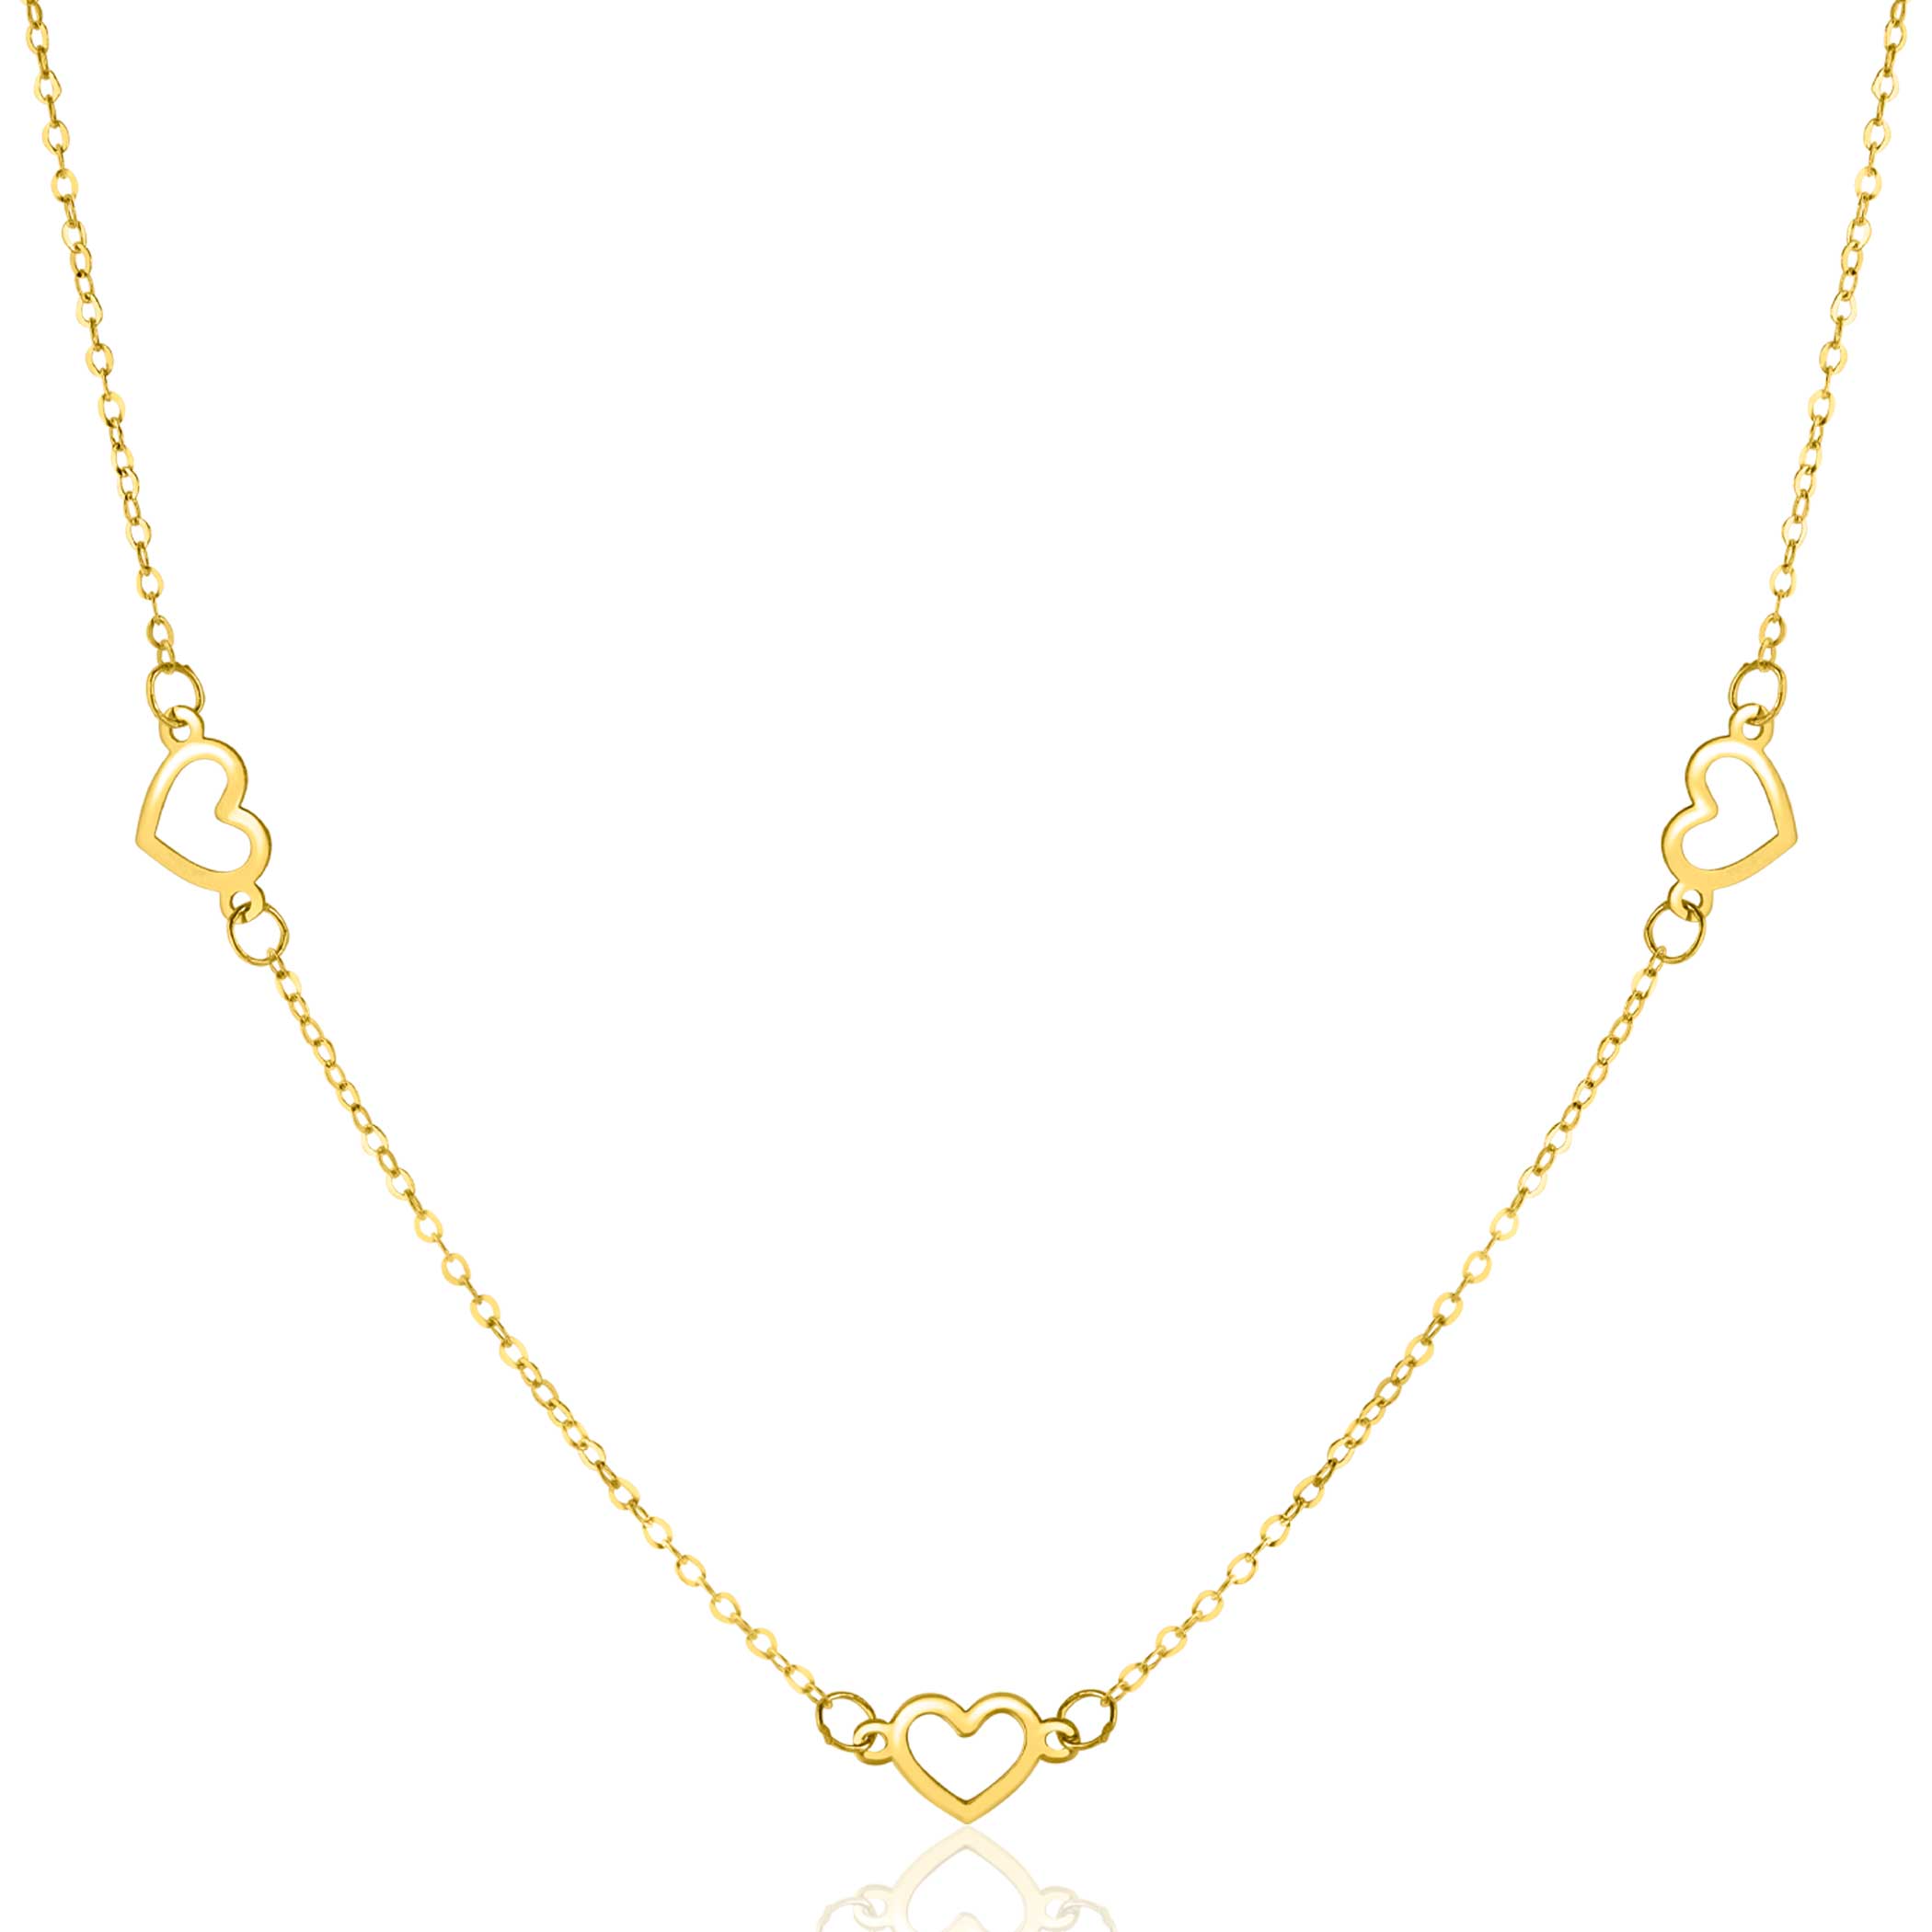 ZINZI Gold 14 carat gold necklace with delicate jasseron links and seven open hearts, 5mm wide, 42-45cm ZGC504
